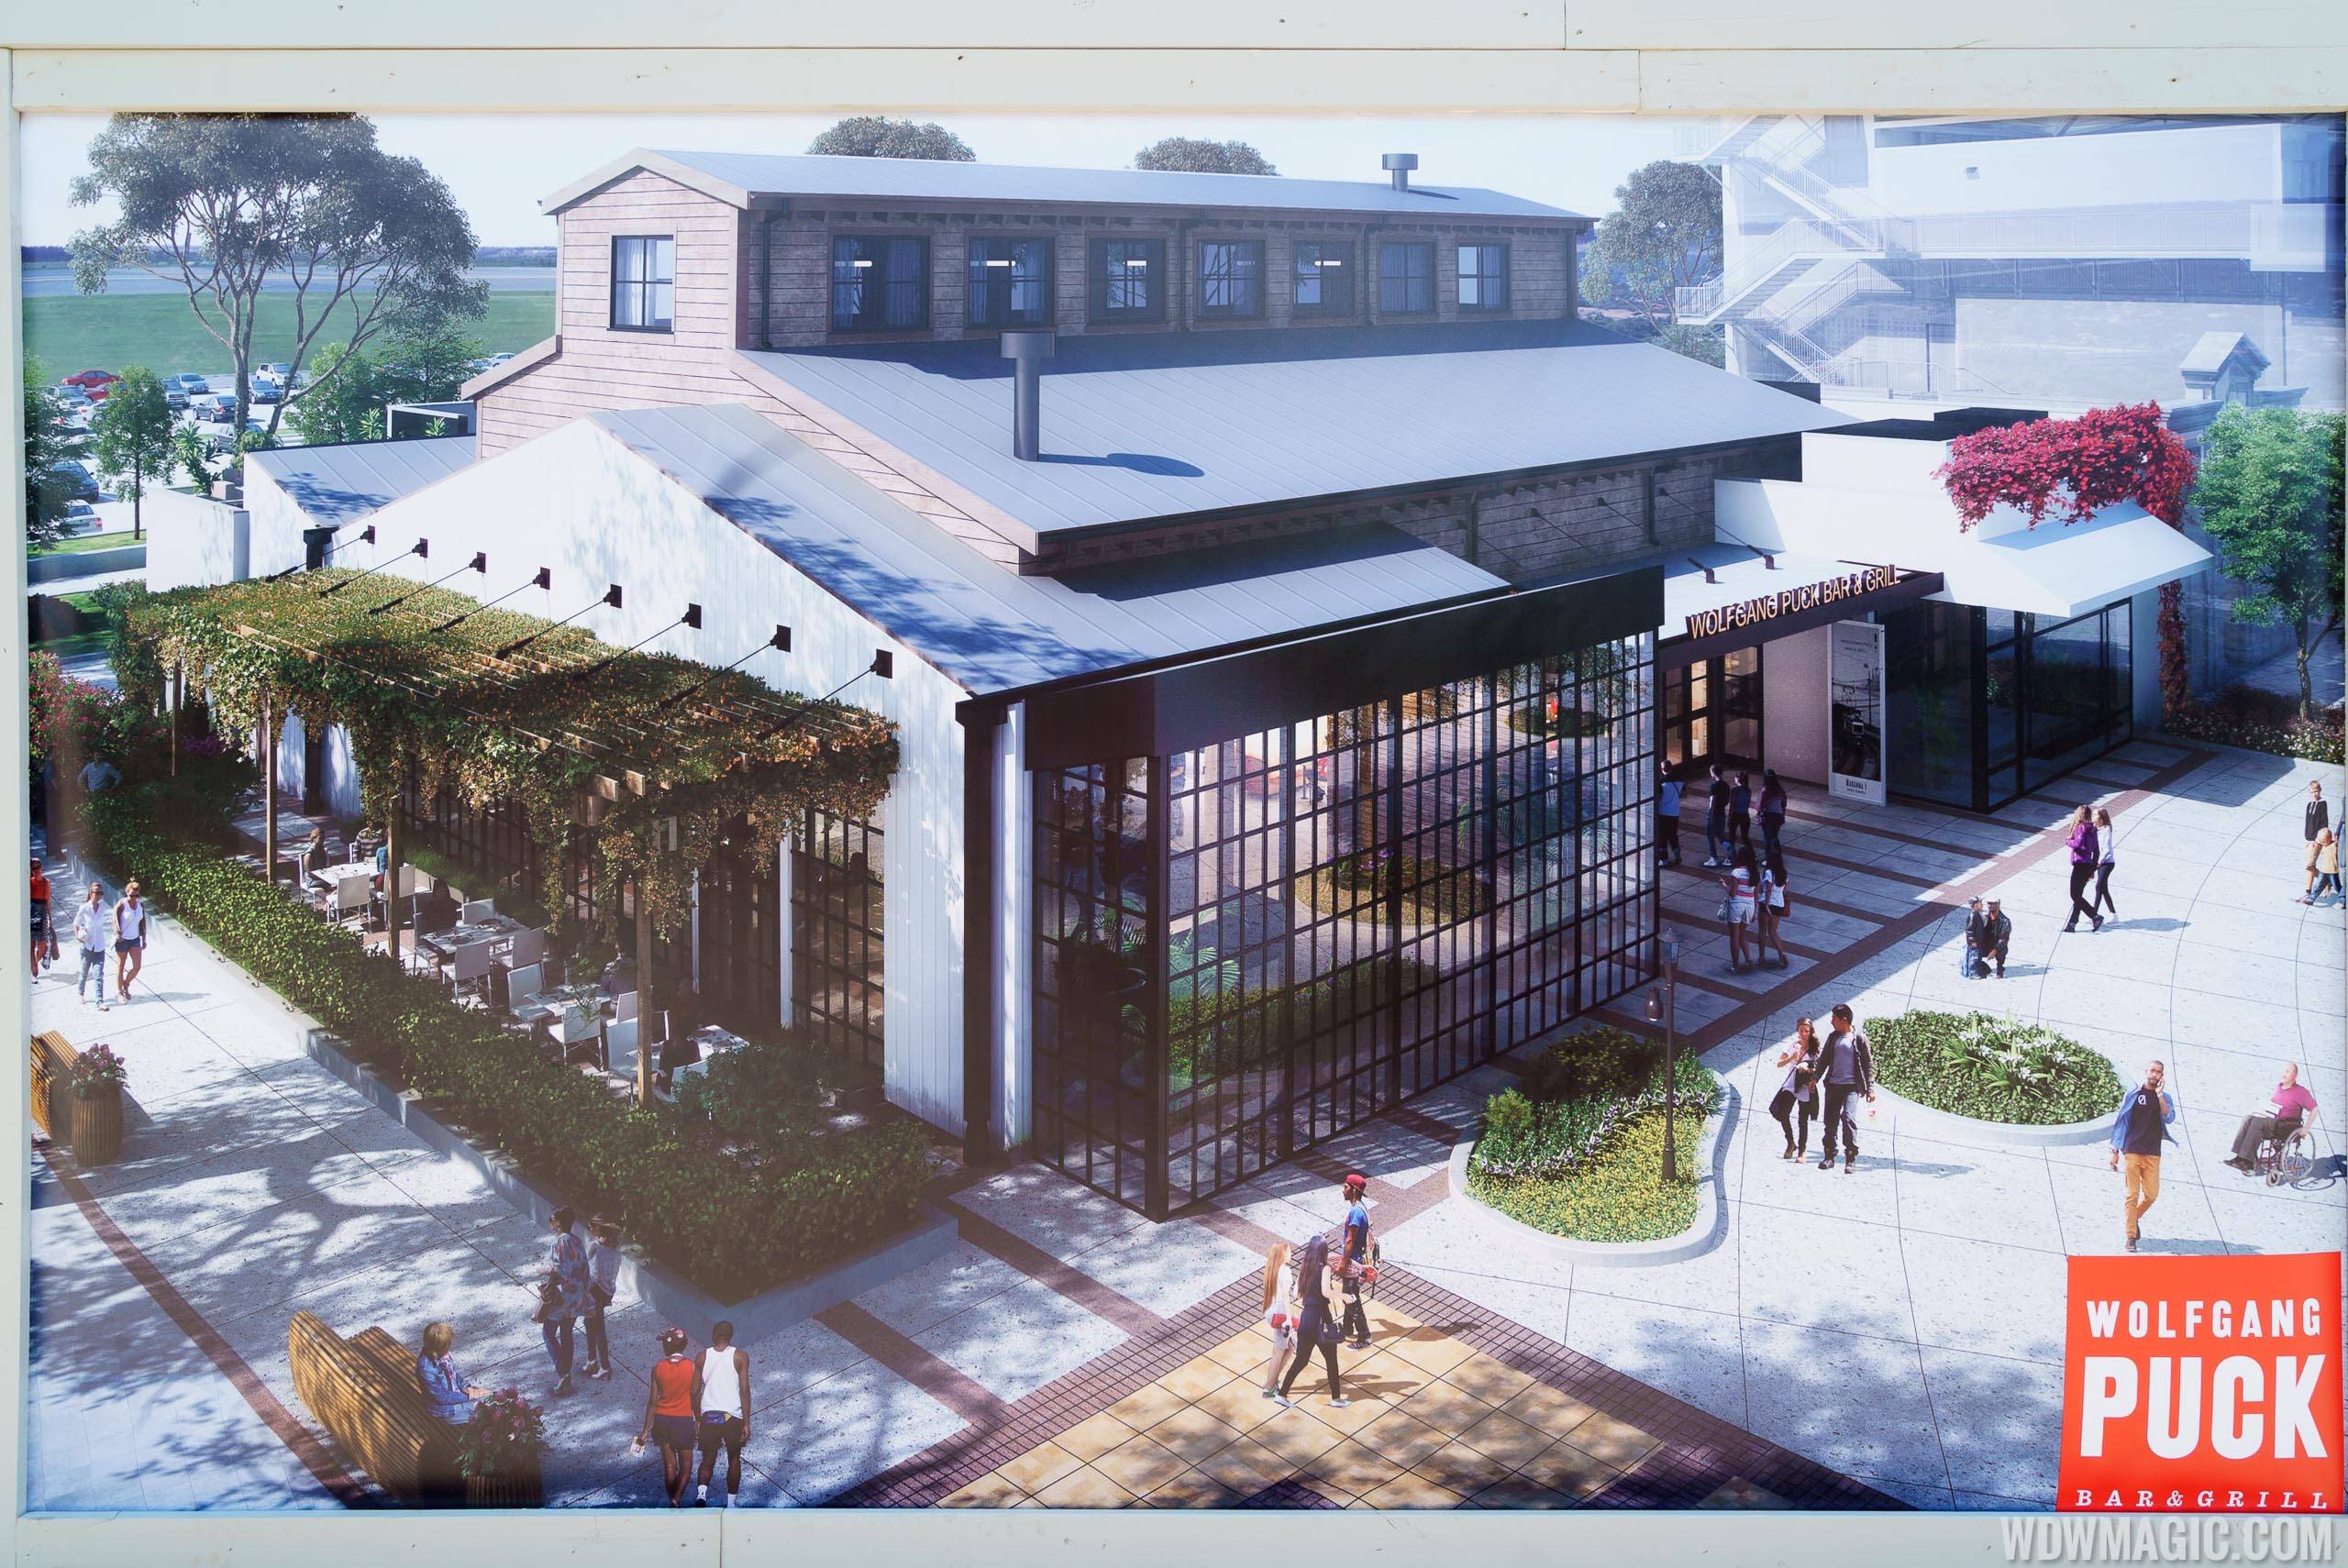 Wolfgang Puck Bar and Grill concept art